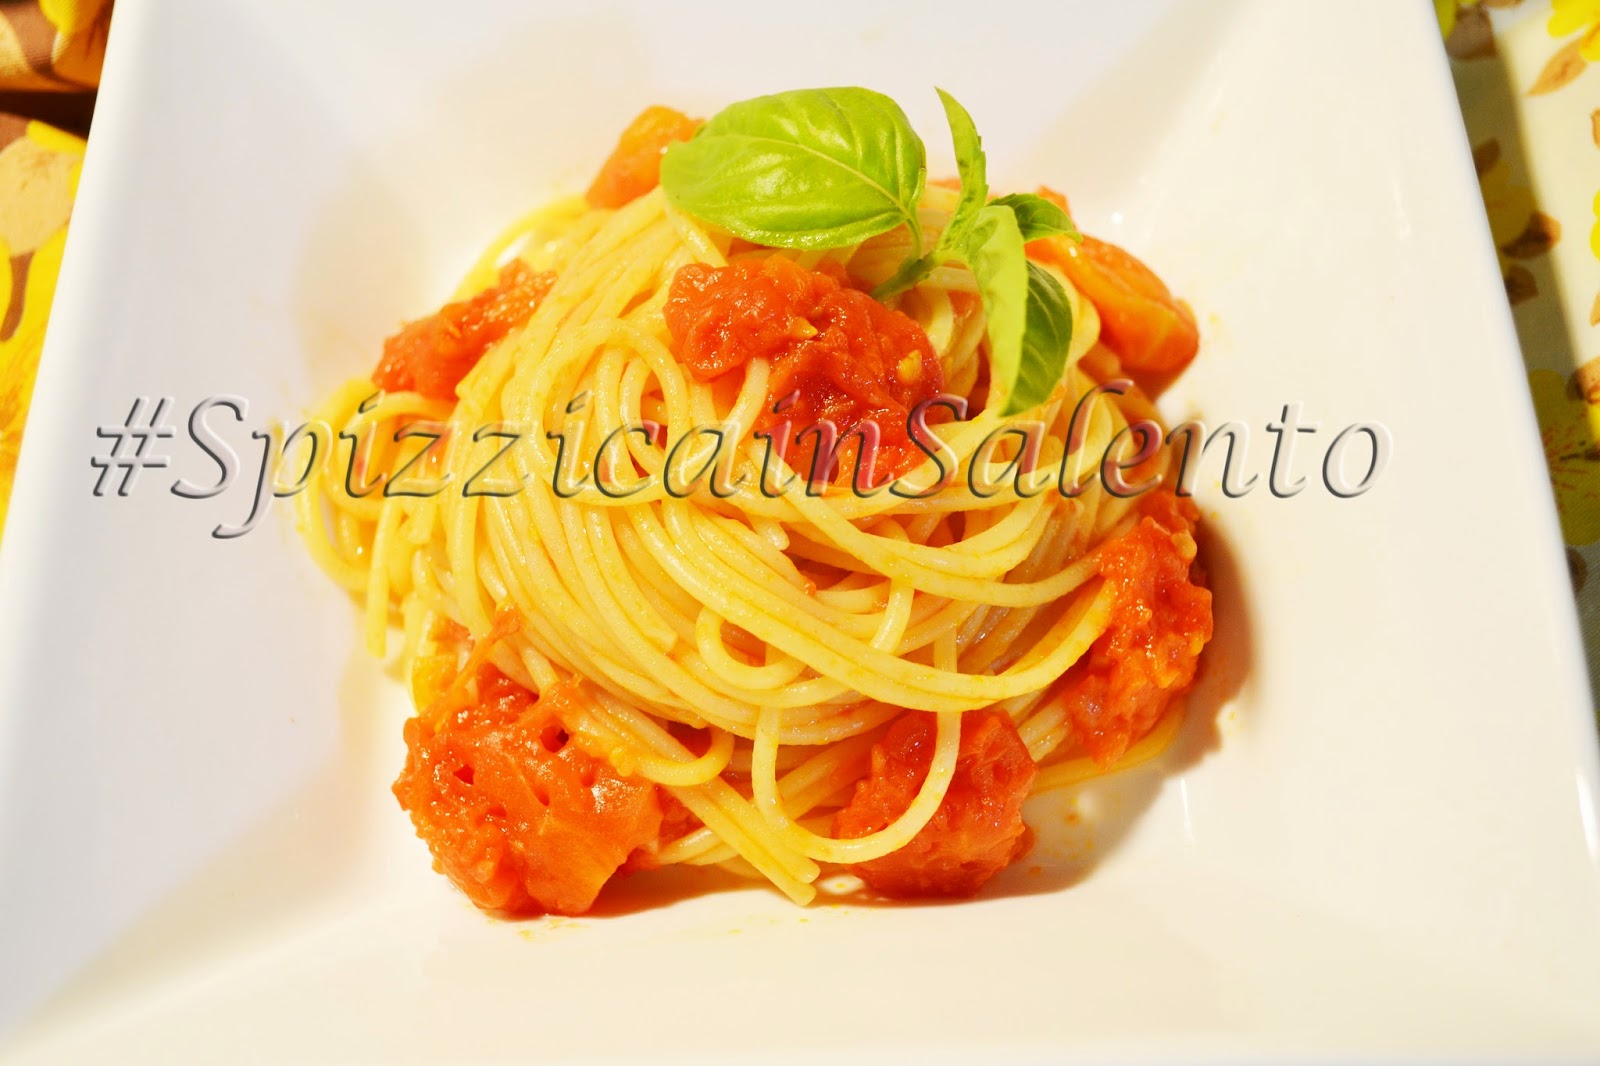 les spaghettis sauce tomate/basilic- la recette traditionnelle made in italy